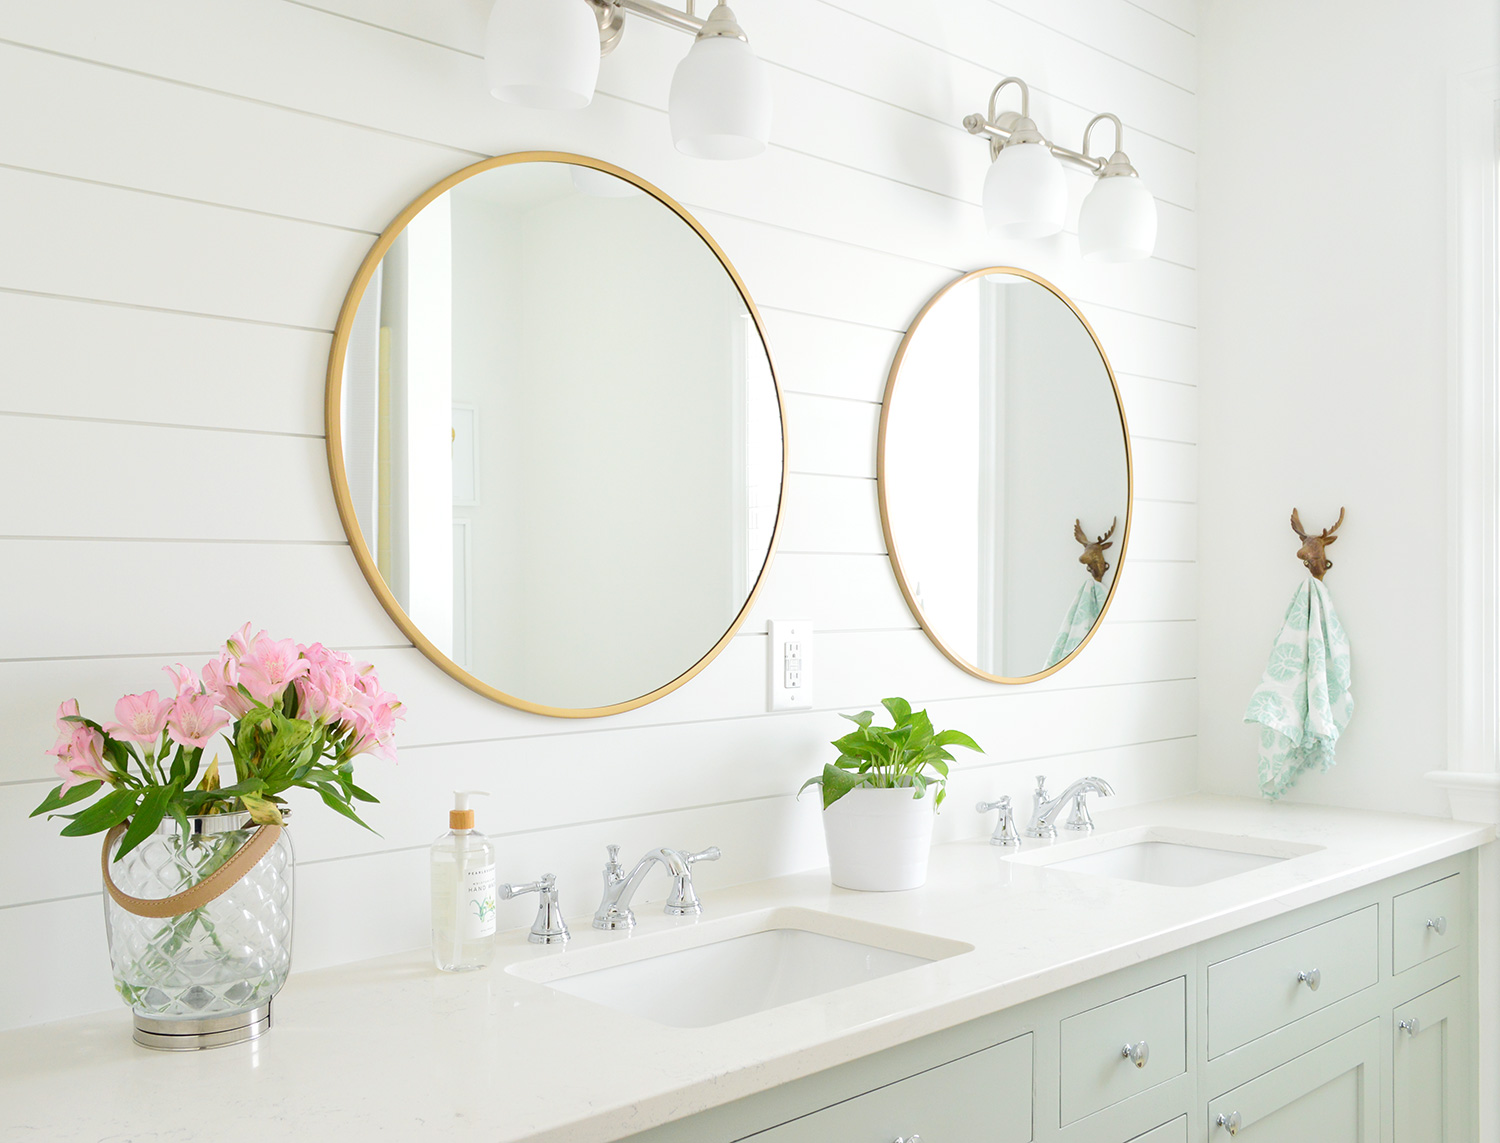 Bathroom “Spa” Makeovers - Wallauer's Paint Center